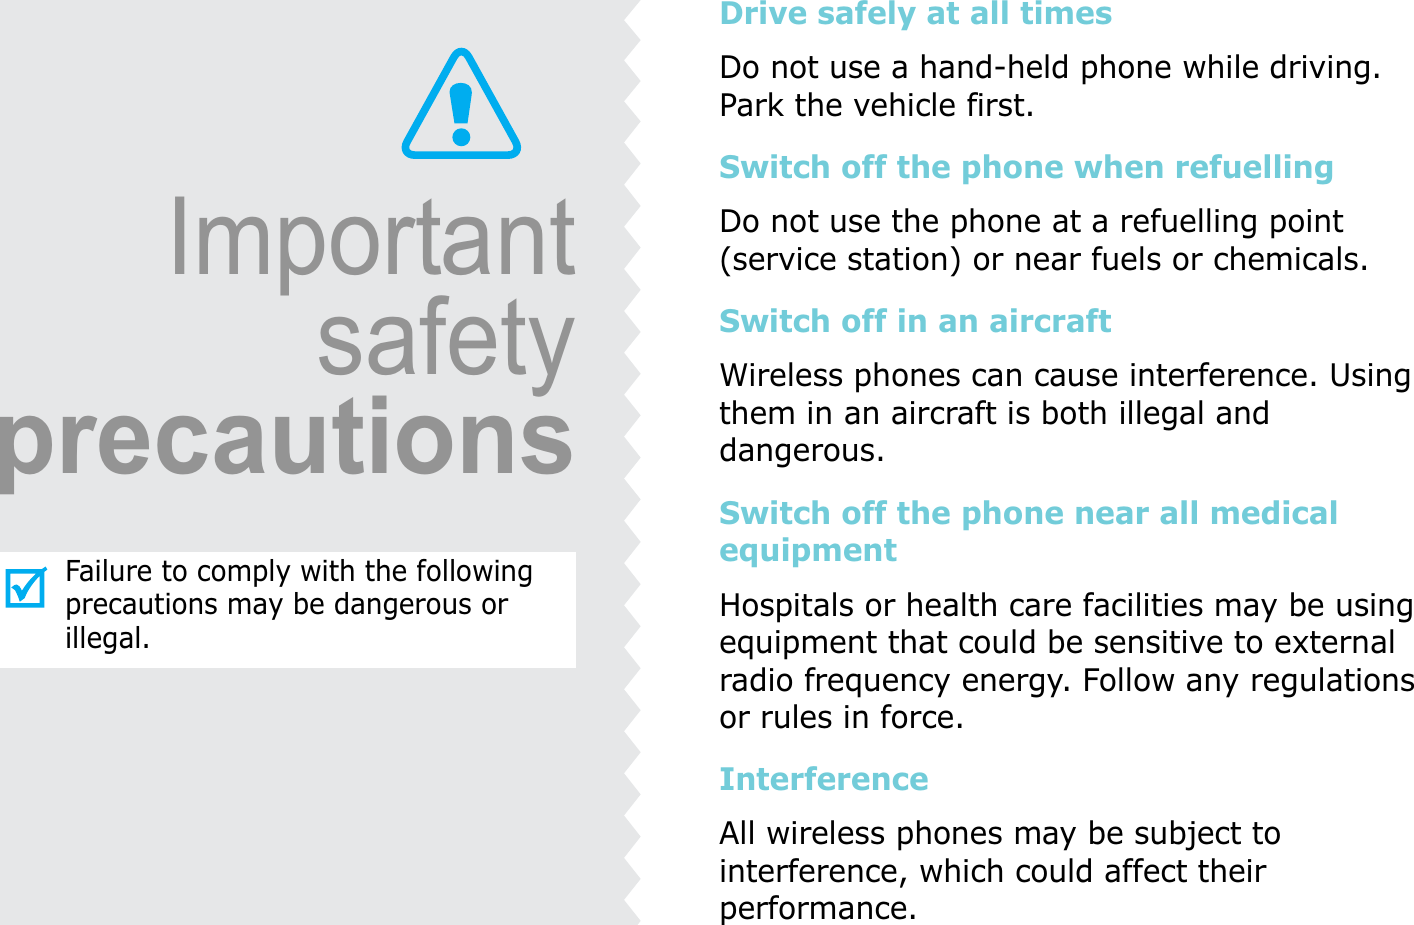 ImportantsafetyprecautionsFailure to comply with the following precautions may be dangerous or illegal.Drive safely at all timesDo not use a hand-held phone while driving. Park the vehicle first. Switch off the phone when refuellingDo not use the phone at a refuelling point (service station) or near fuels or chemicals.Switch off in an aircraftWireless phones can cause interference. Using them in an aircraft is both illegal and dangerous.Switch off the phone near all medical equipmentHospitals or health care facilities may be using equipment that could be sensitive to external radio frequency energy. Follow any regulations or rules in force.InterferenceAll wireless phones may be subject to interference, which could affect their performance.